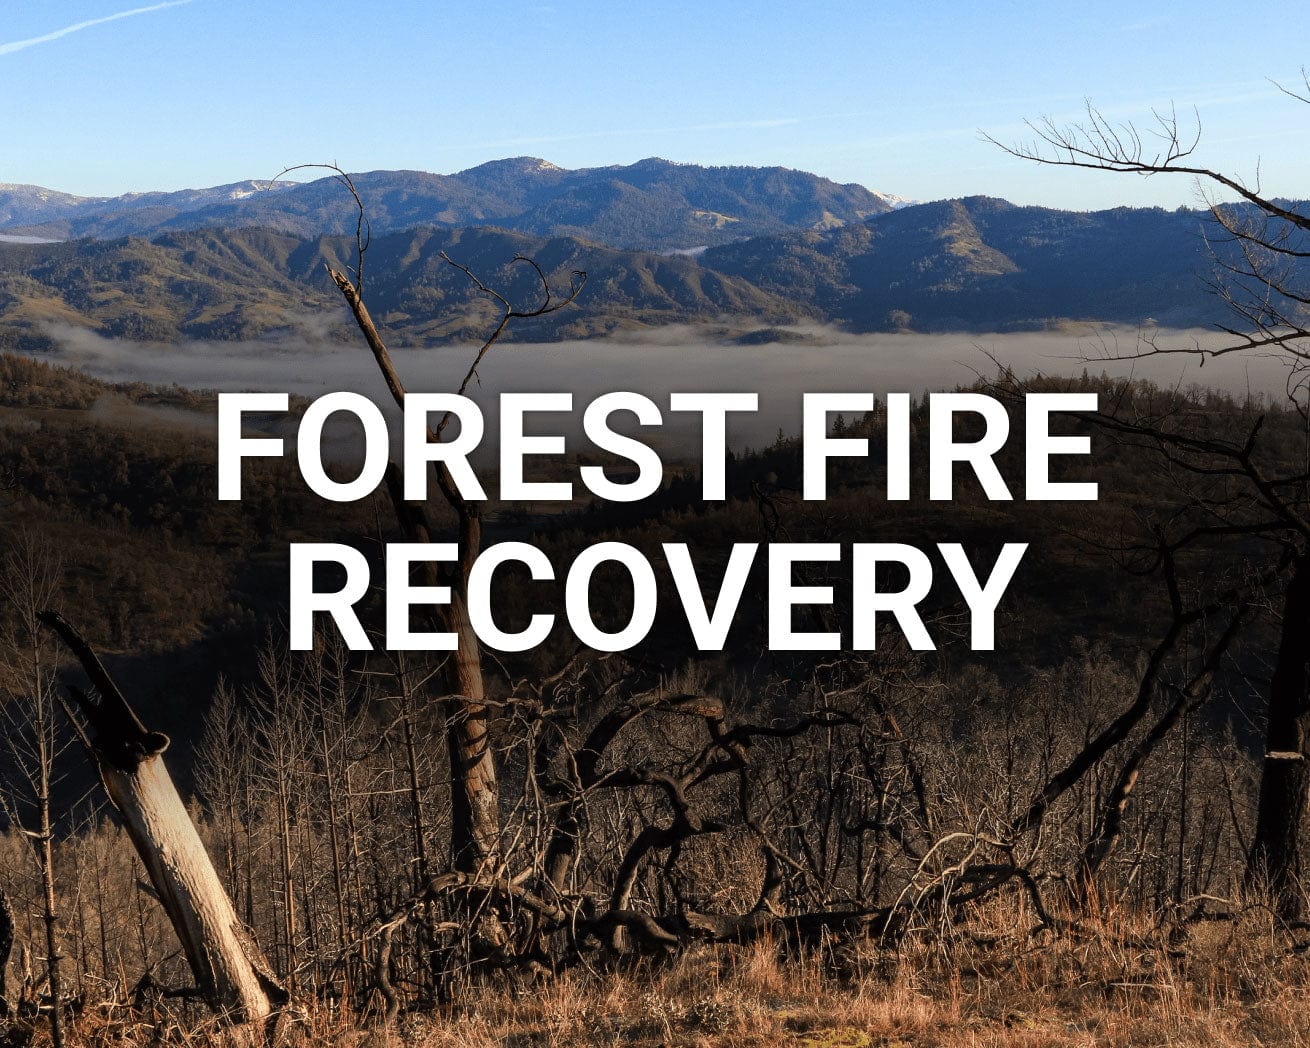 One Tree Planted - Plant a Tree - Help Forest Fire Recovery